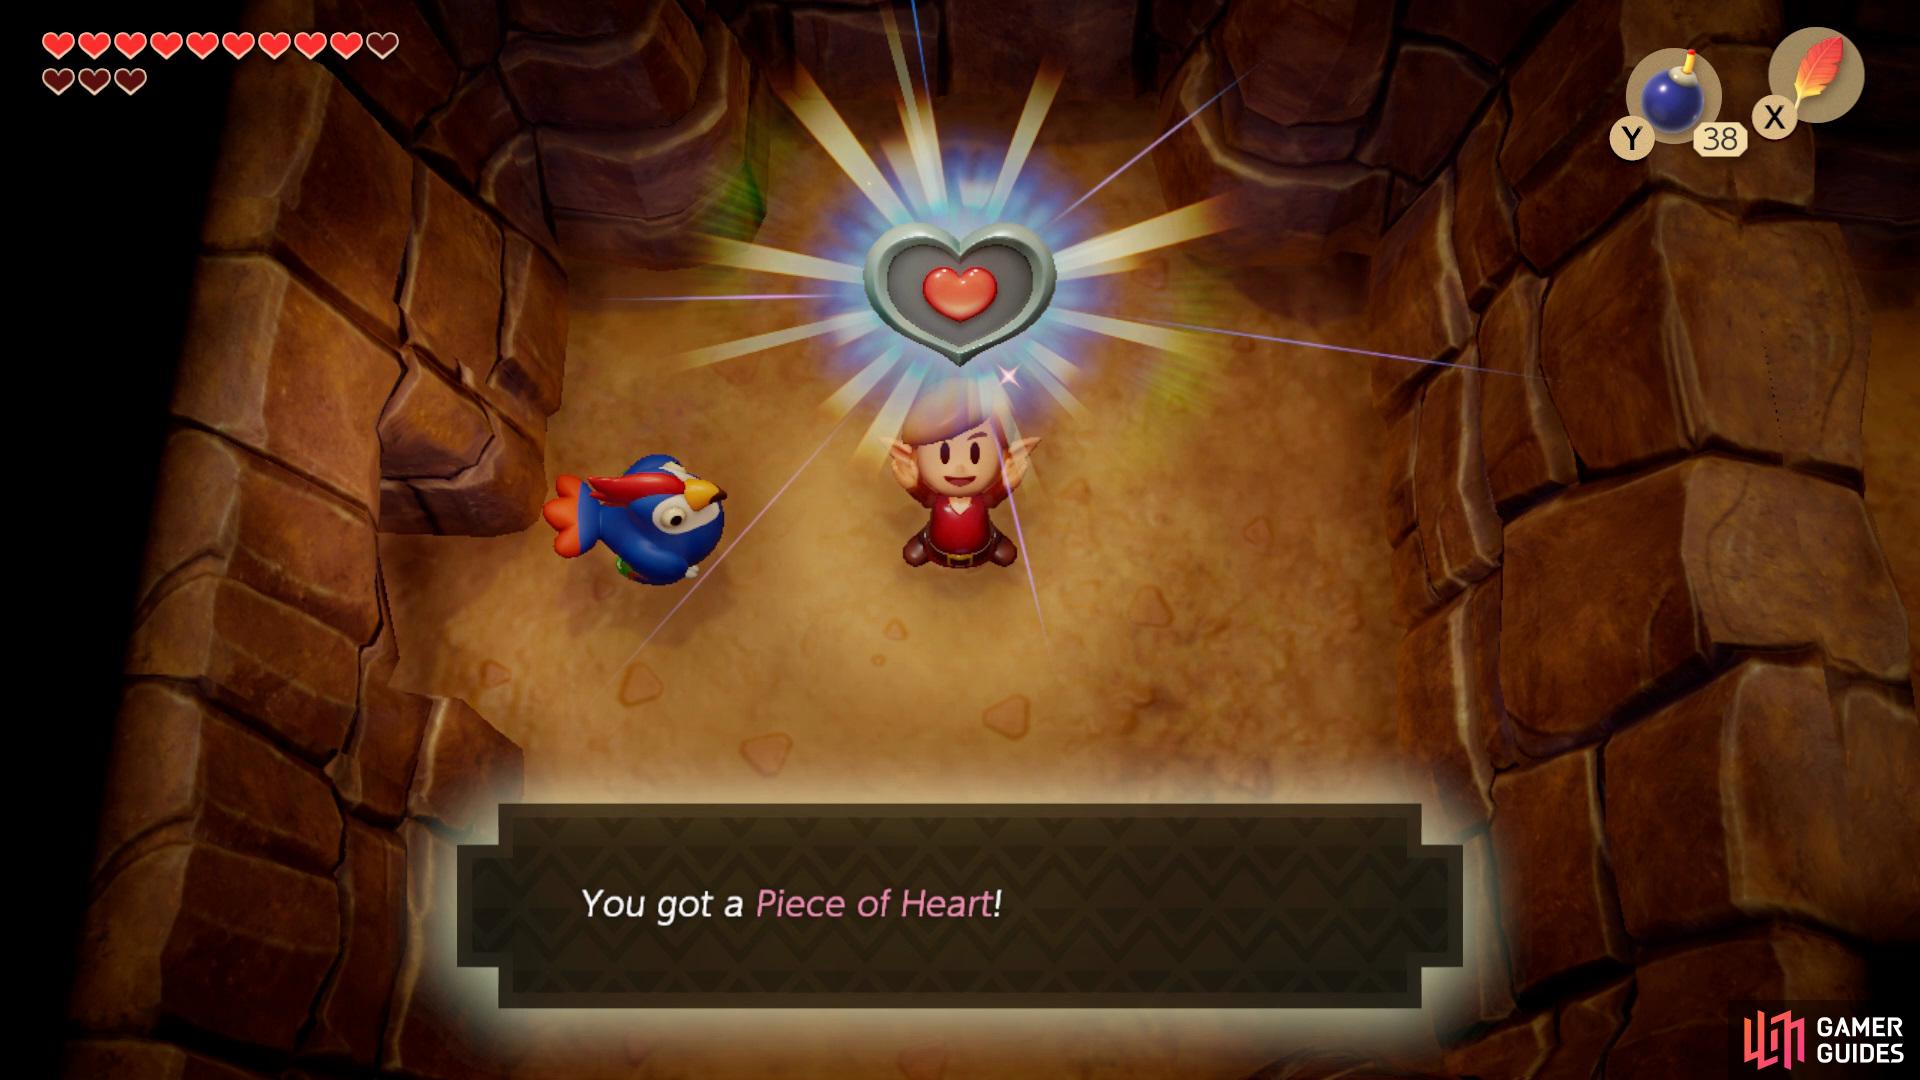 Head down into the cave and right to find a Piece of Heart.